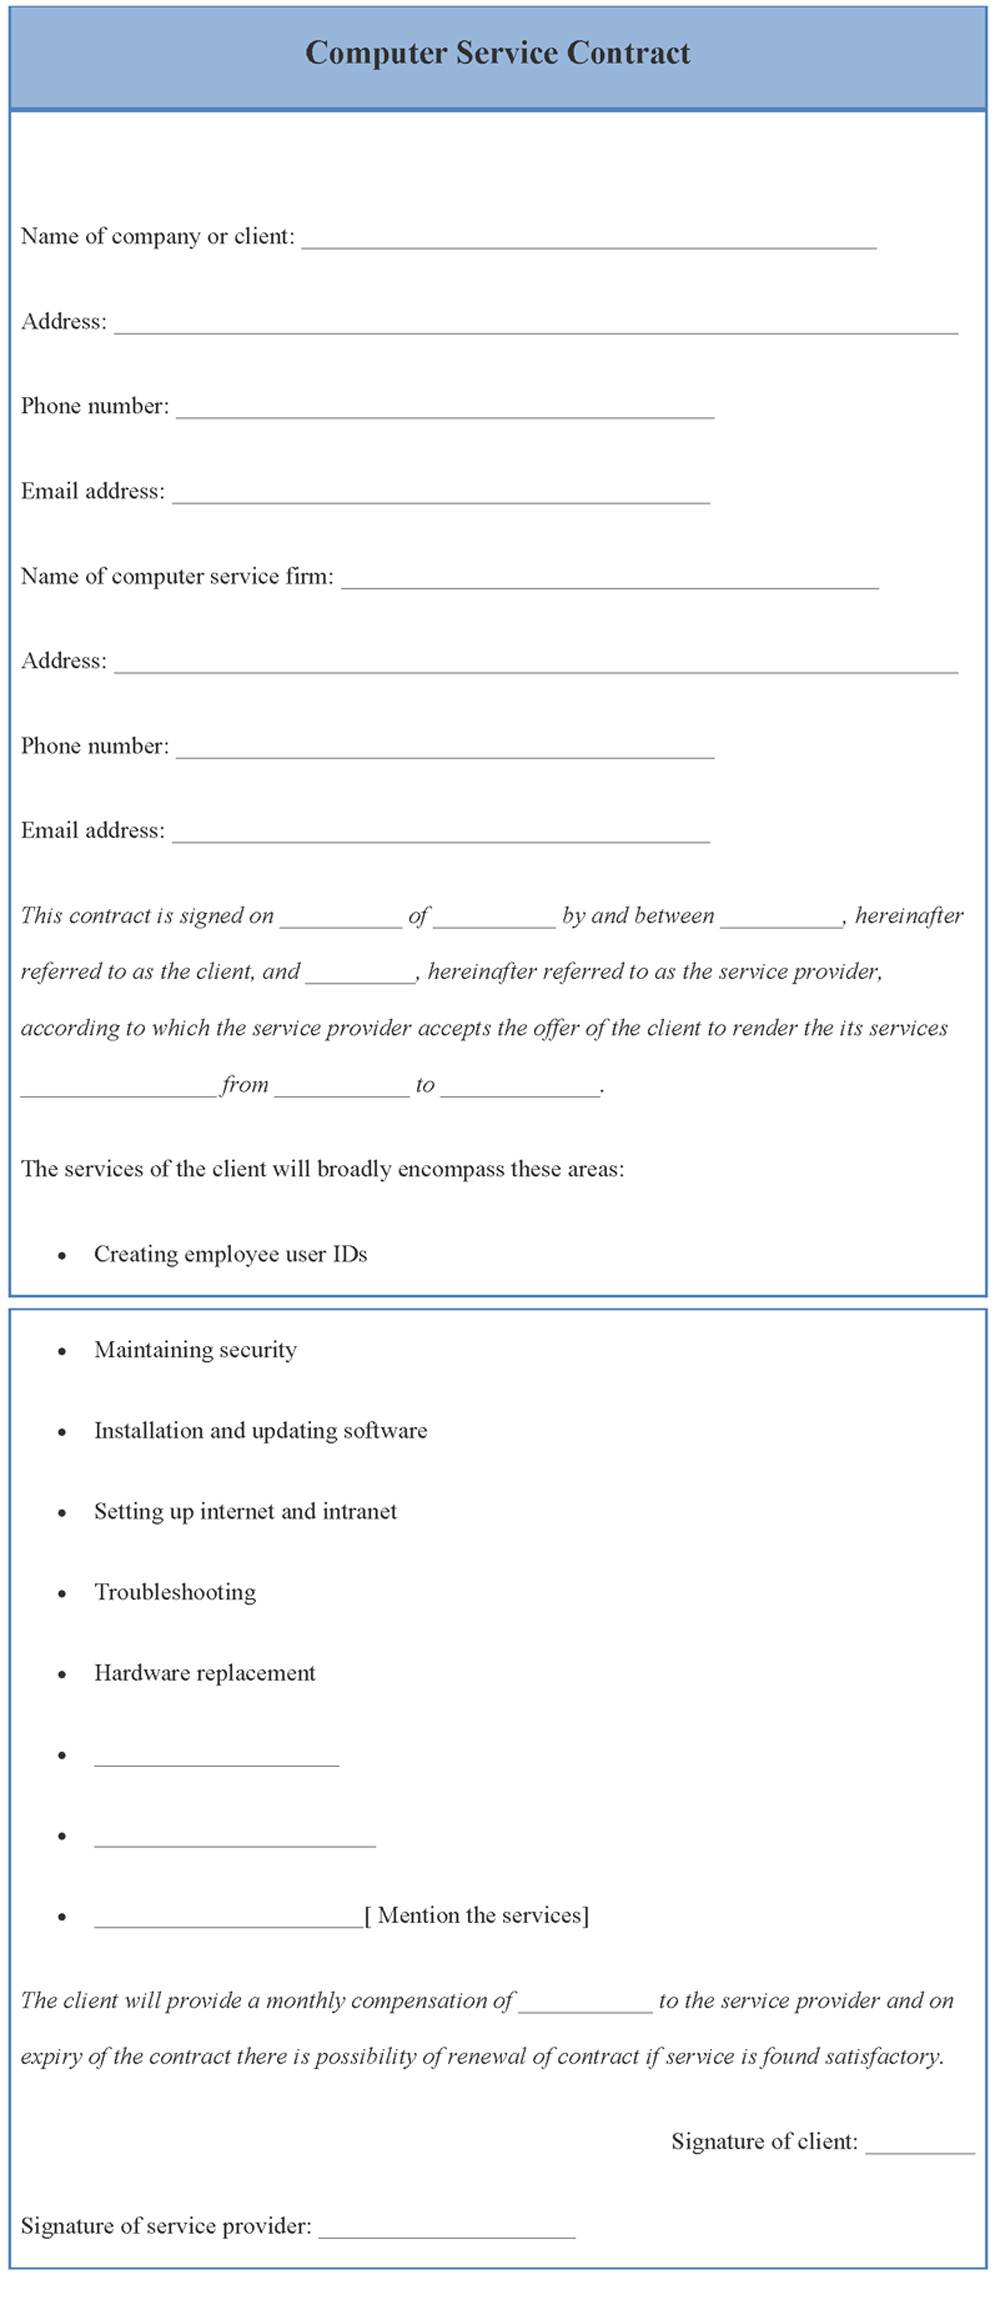 computer service contract template